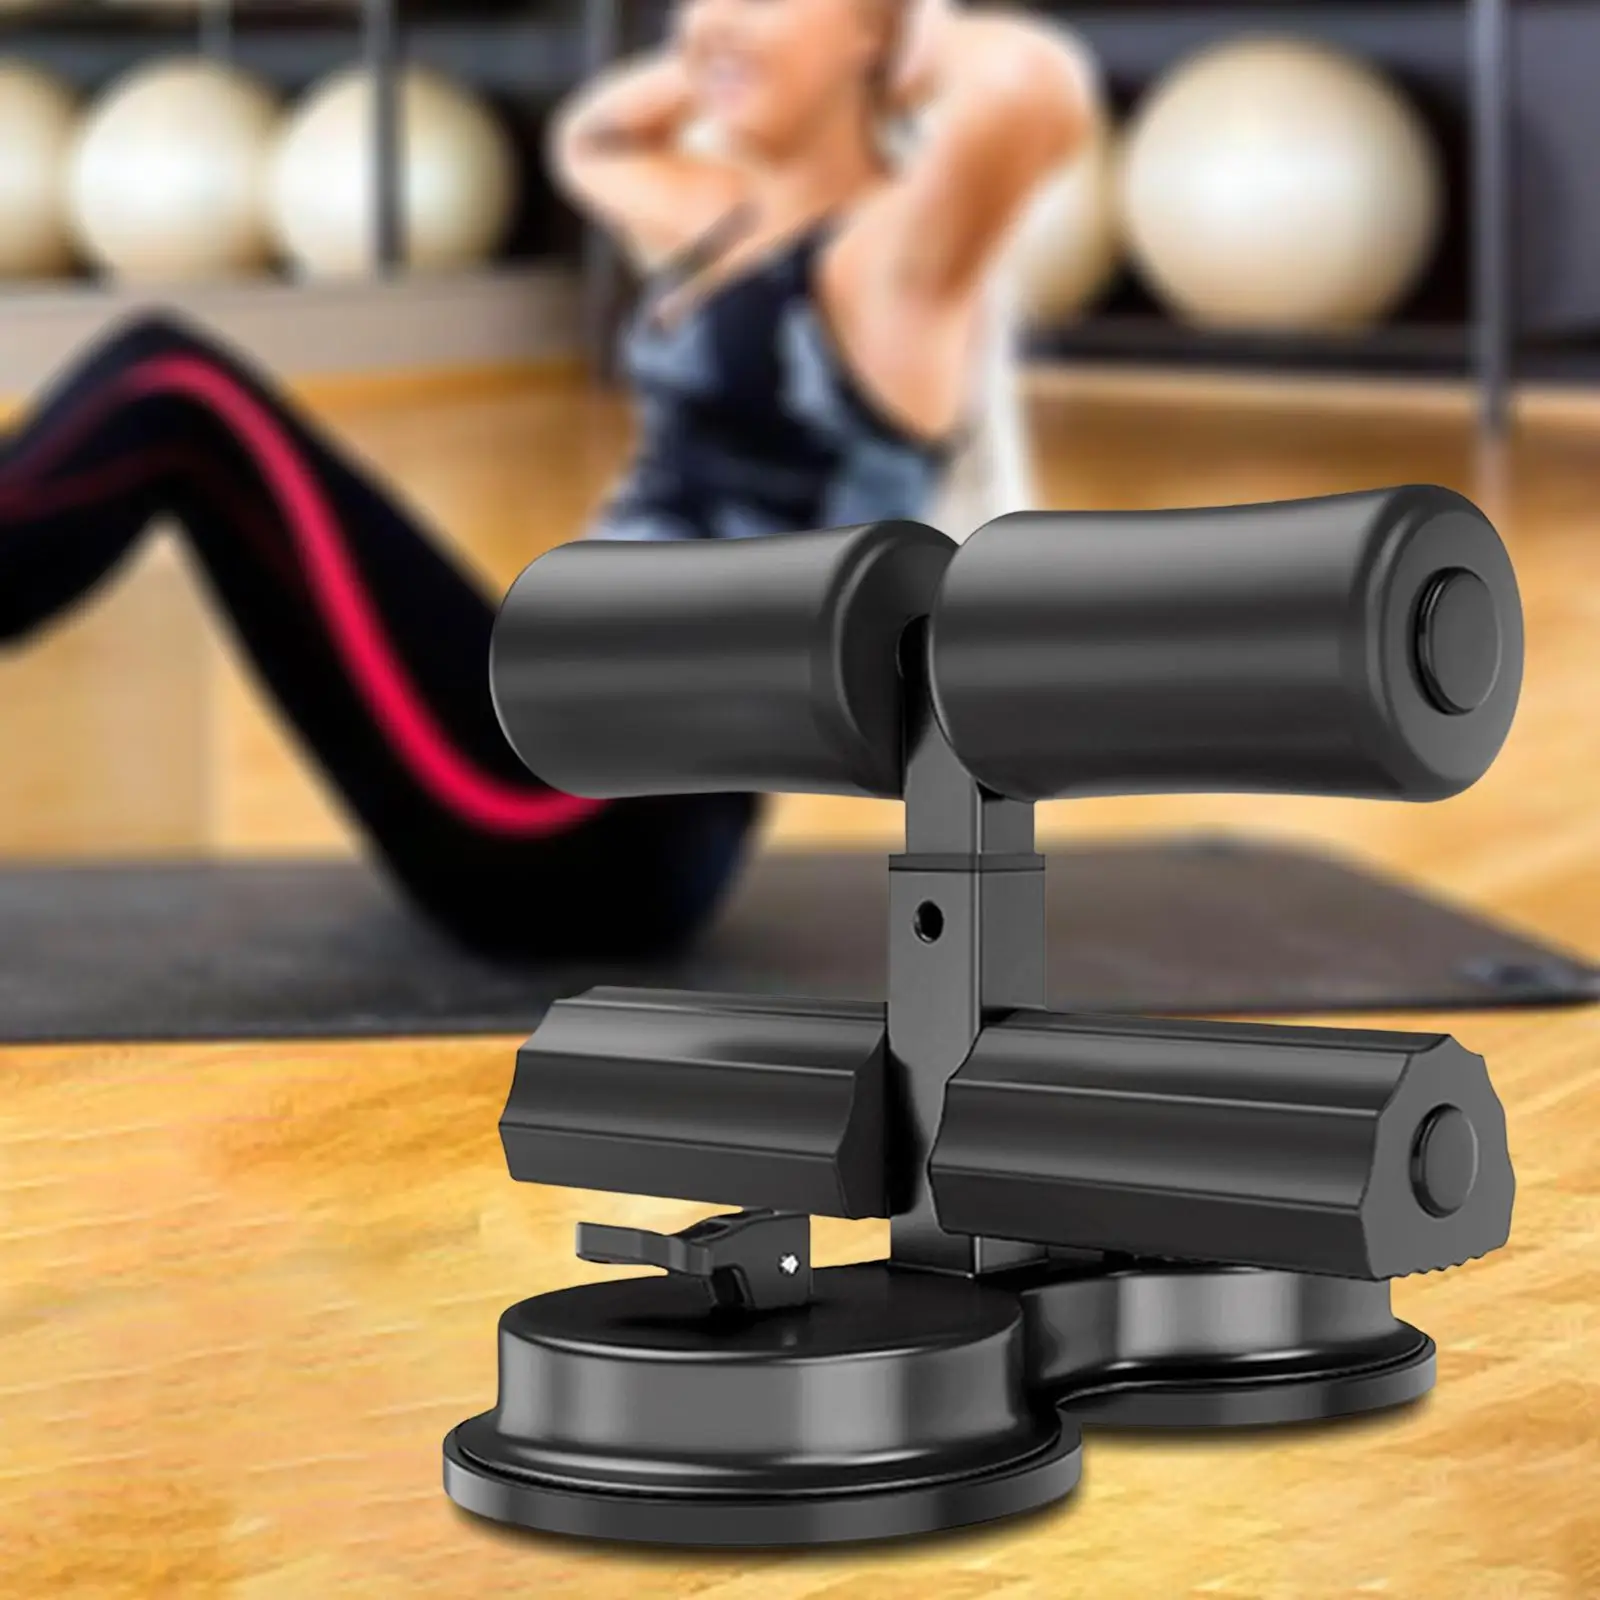 Sit Up Floor Bar Assistance Device with Strong Suction Cup 3 Height Adjustments for Home Abdominal Muscle Core Strength Exercise